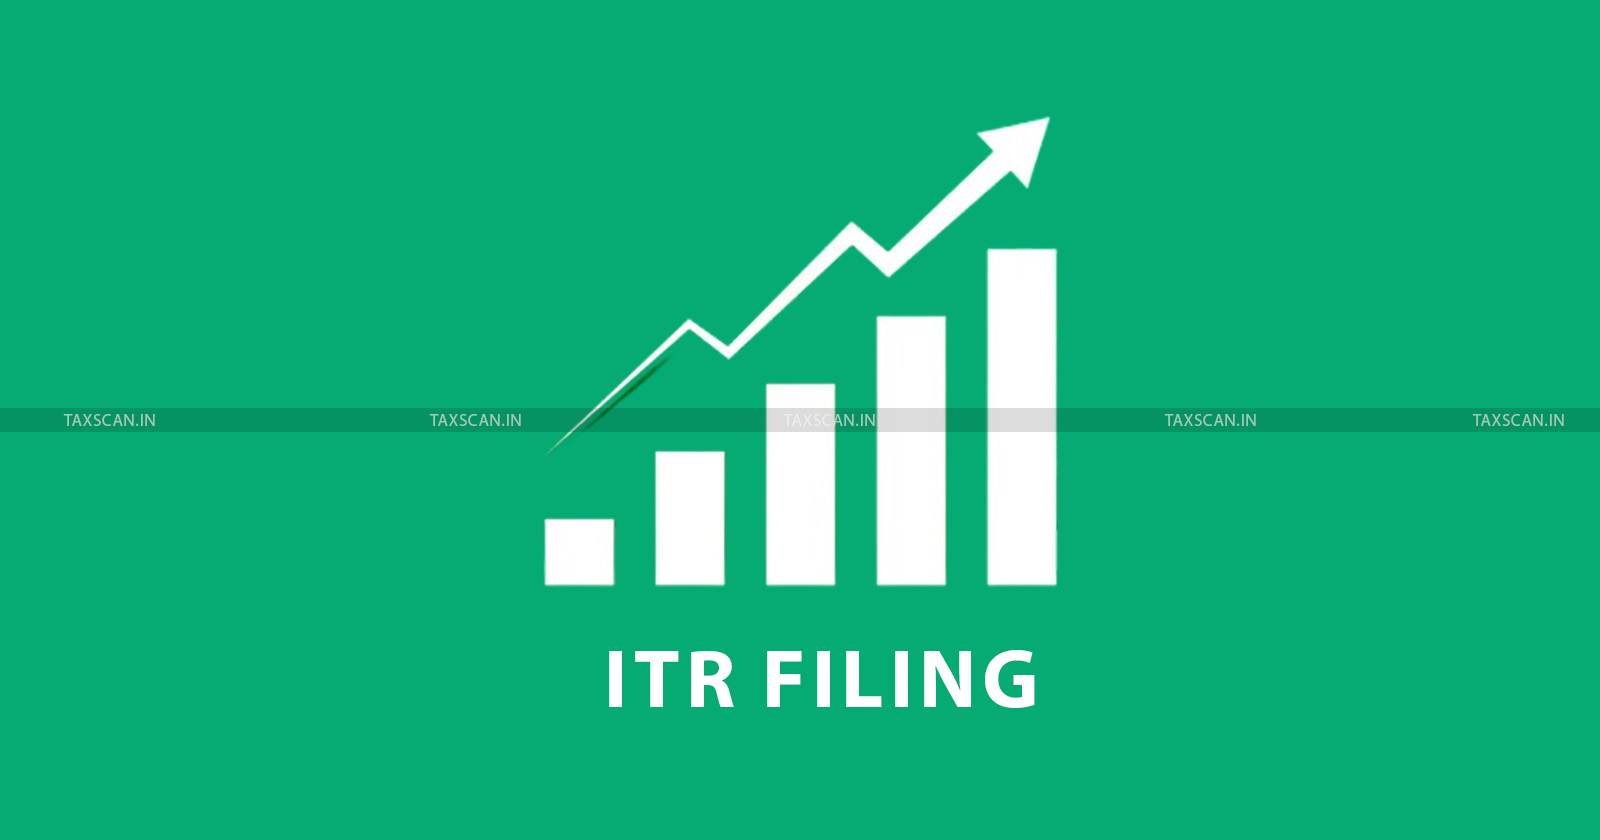 ITR filing - Direct Tax collections overview - Income Tax Returns - CBDT - CBDT Time Series data - taxscan